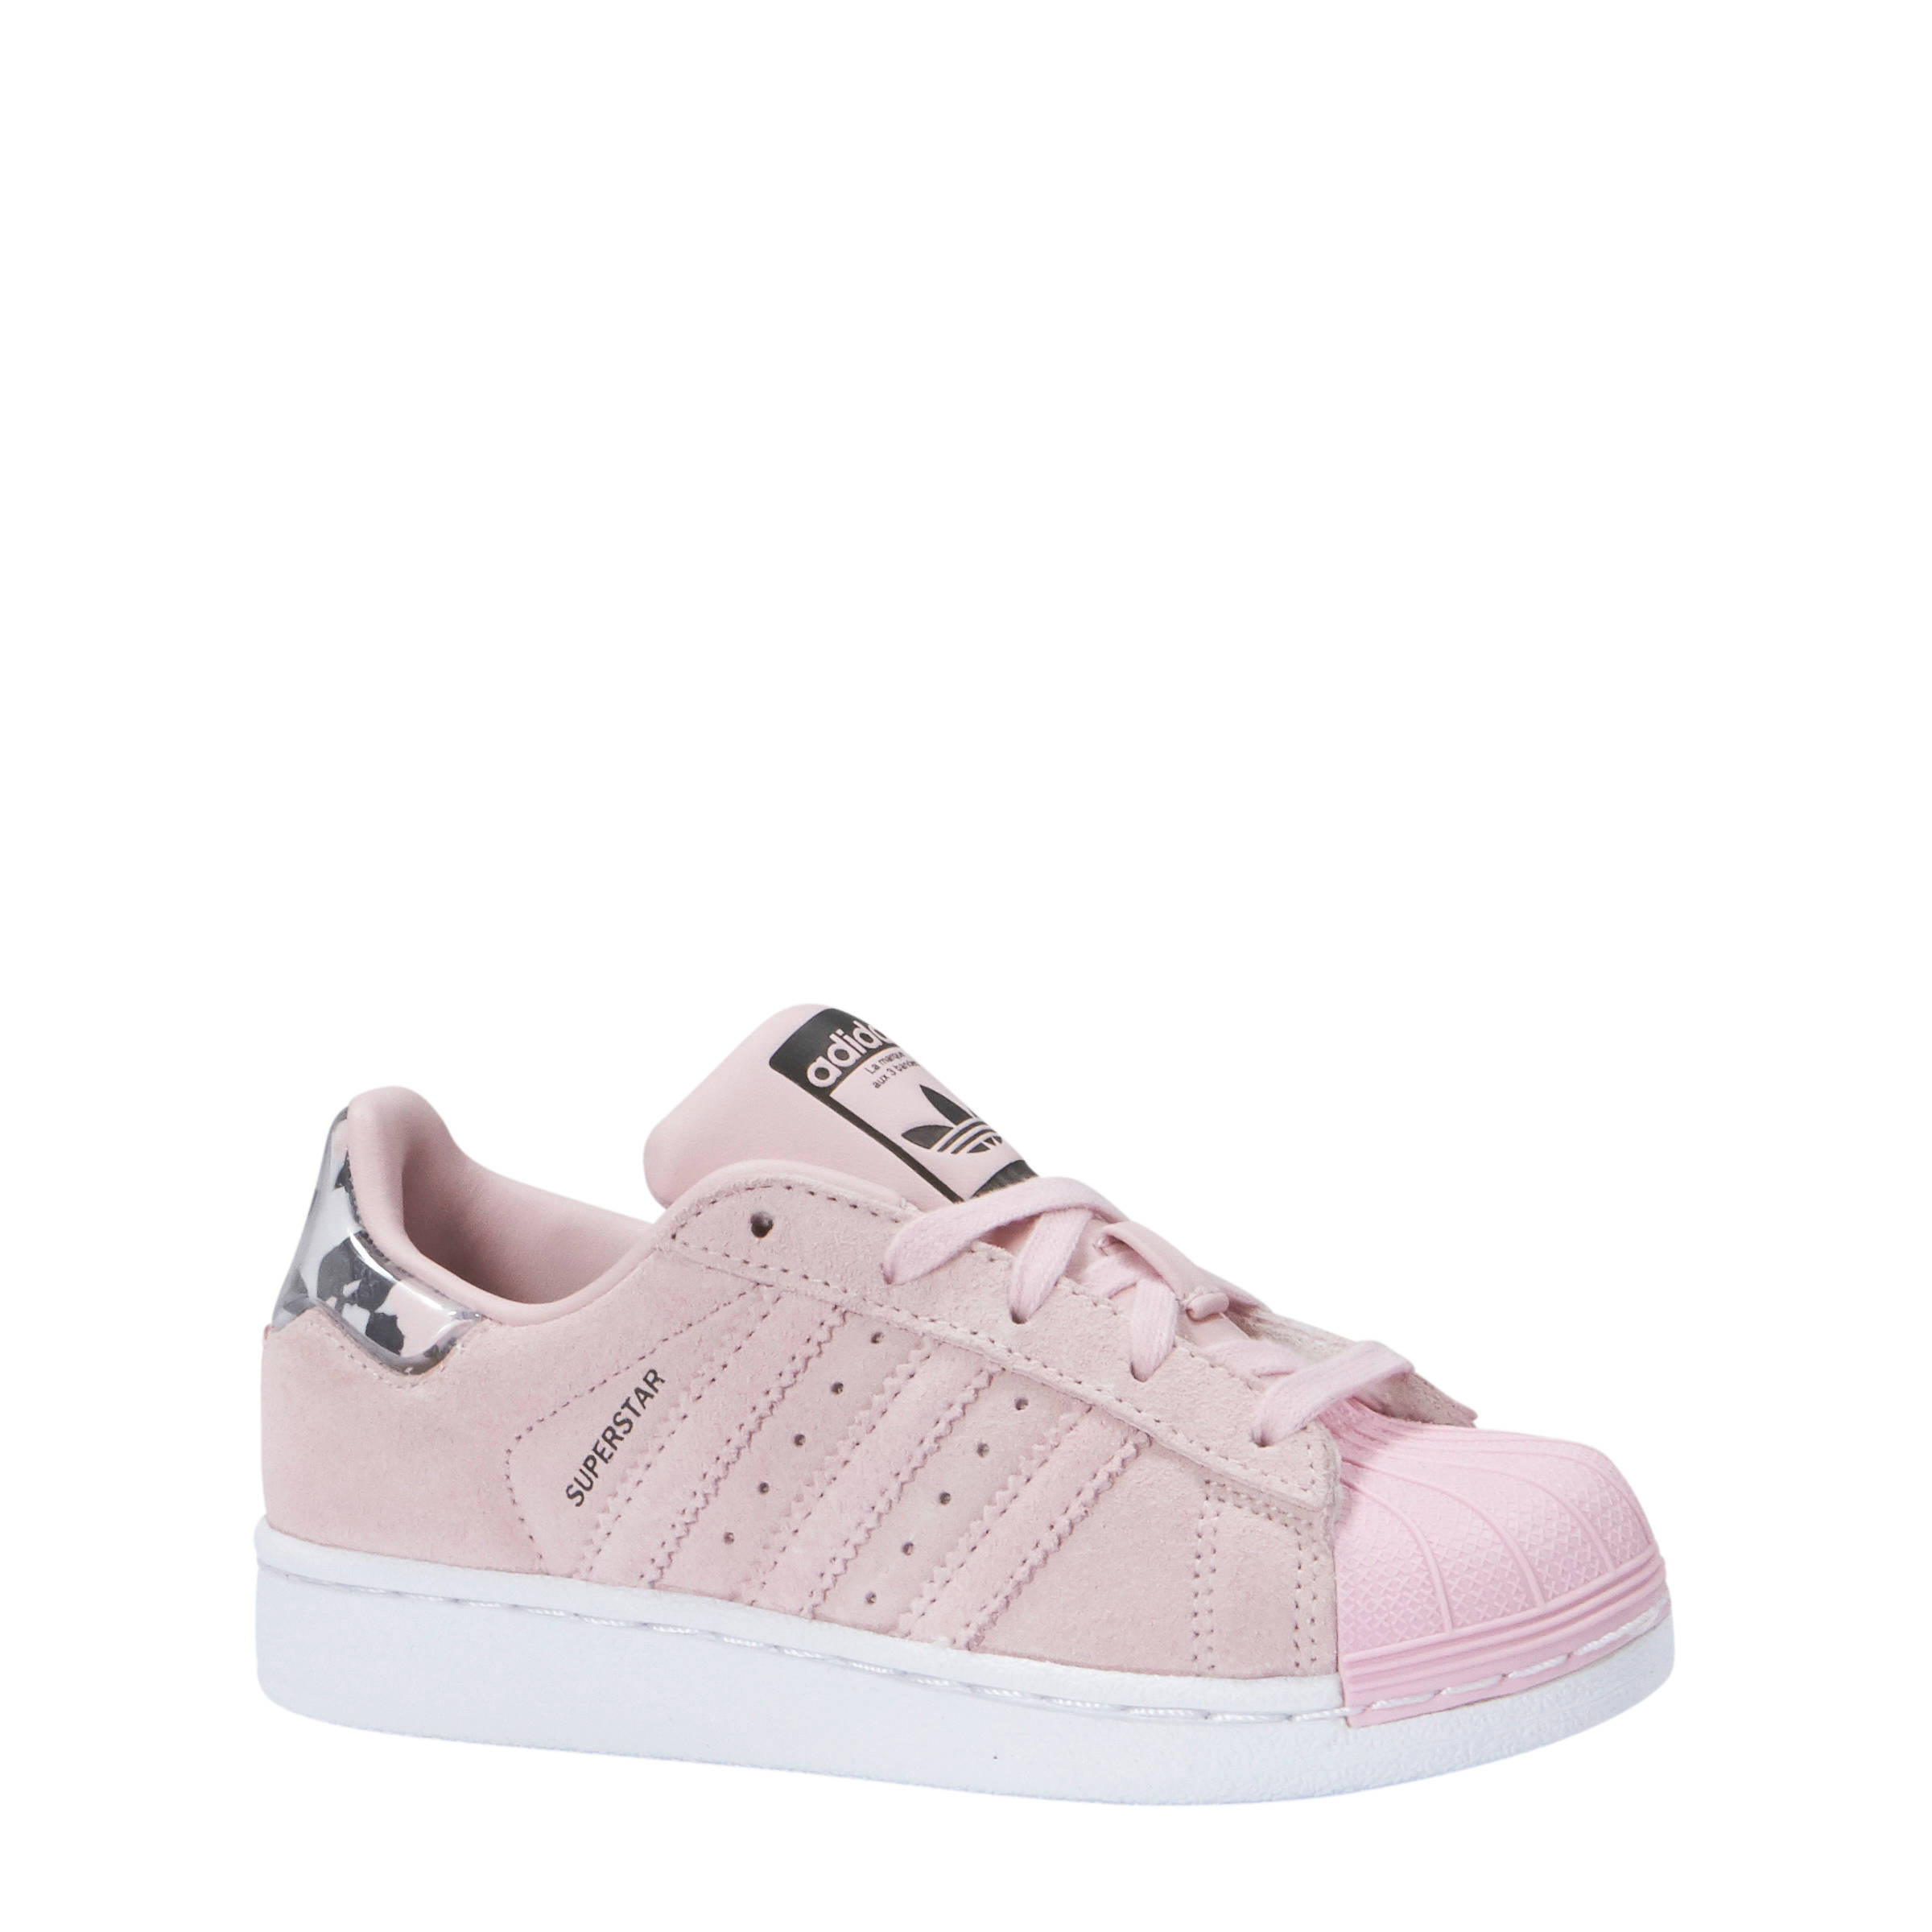 roze superstar adidas Cheaper Than Price> Buy Clothing, and lifestyle products for women & men